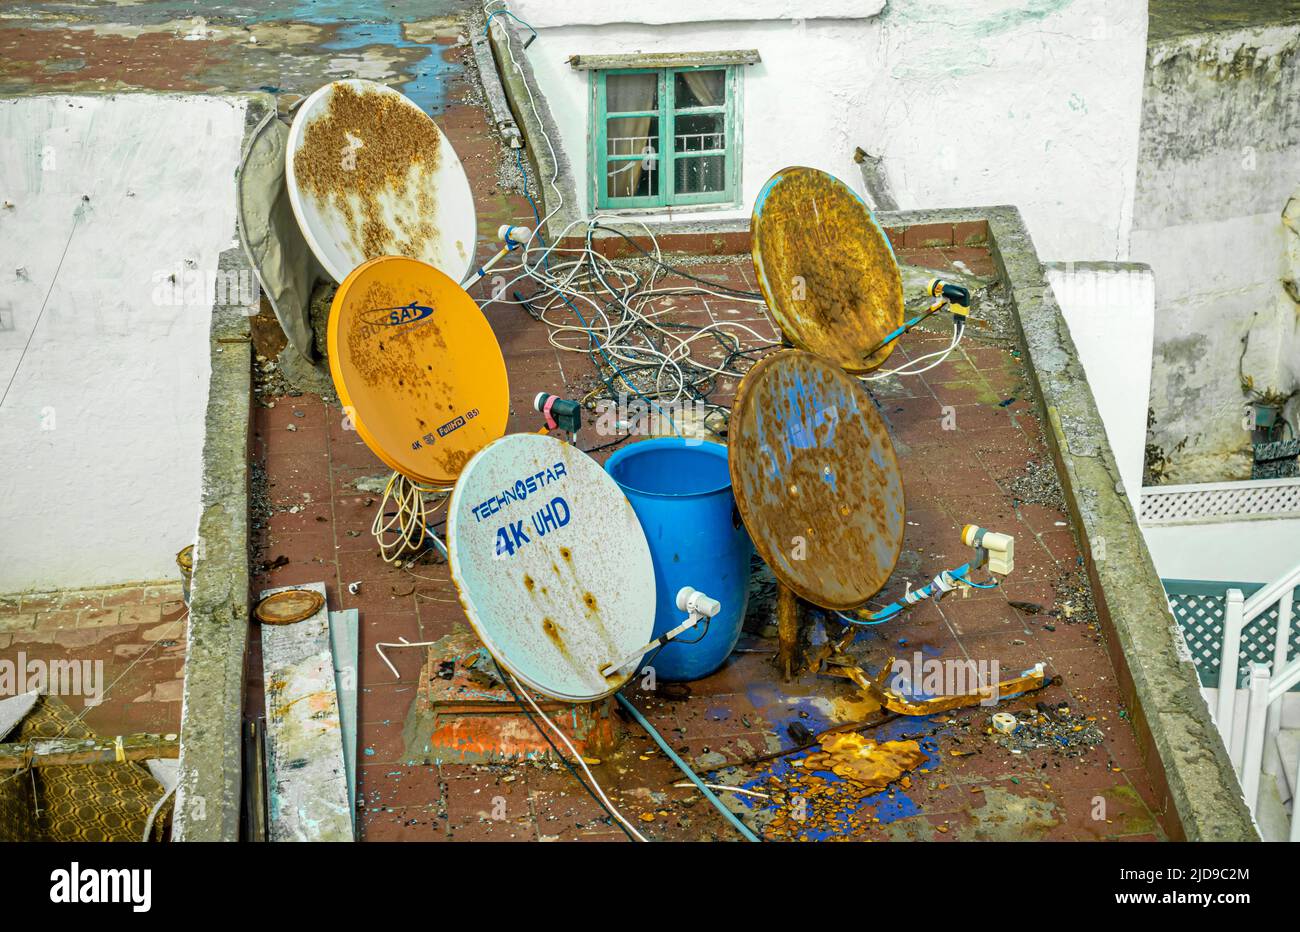 Several rusty dish-shaped satellite parabolic antennas and 4k UHD dish antenna o na roof of a house in central Essaouira, Morocco Stock Photo